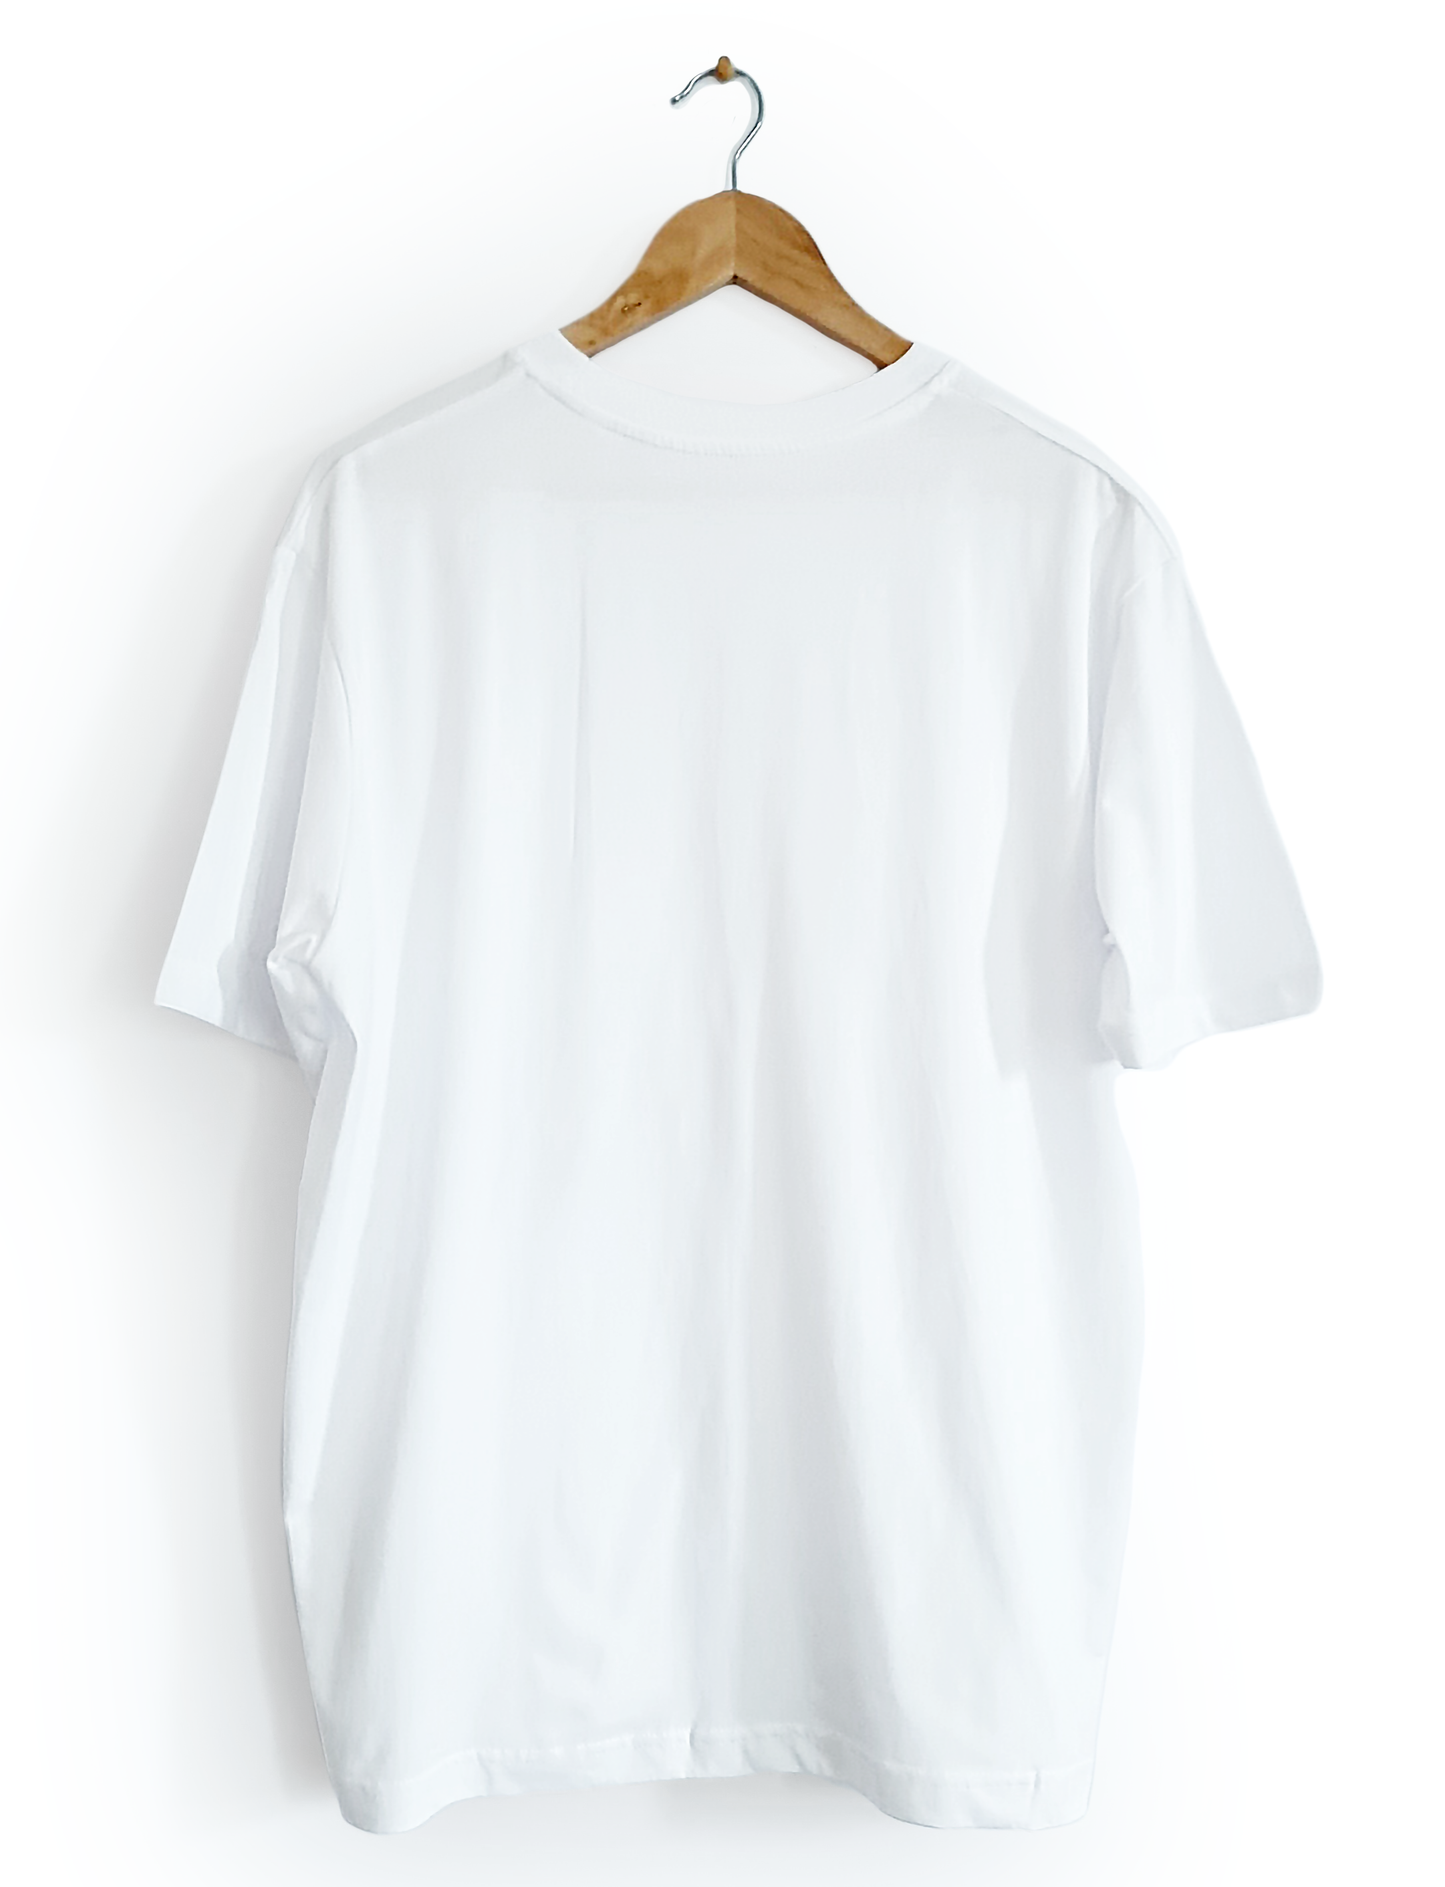 Ethical and sustainable, white organic cotton tee / t shirt with embroidered sacred design for yoga, gym, or lounge wear.